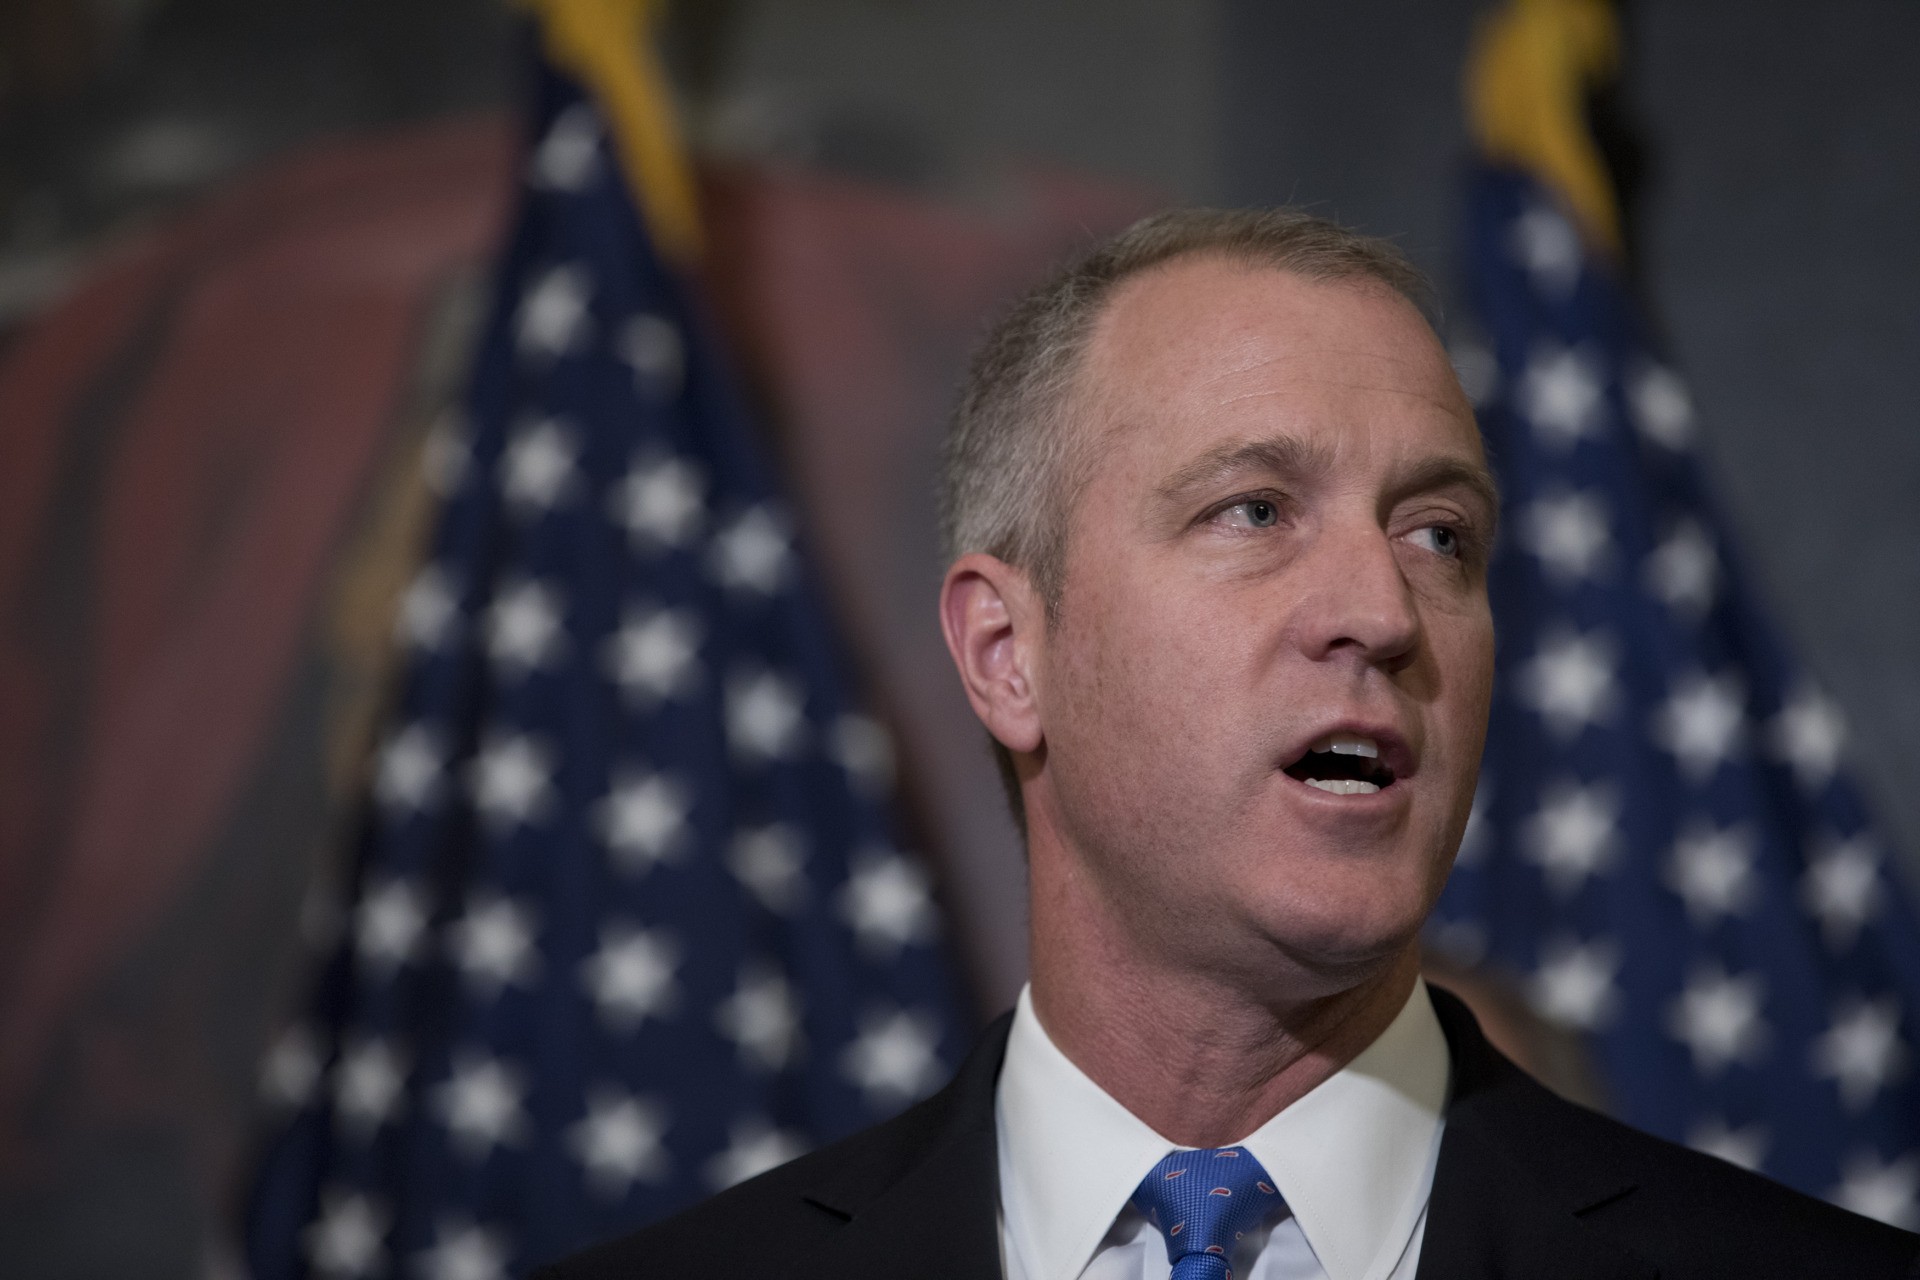 WASHINGTON, DC - MAY 2: Rep. Sean Patrick Maloney (D-NY) speaks at a press conference introducing a bill providing members of the LGBT community with comprehensive federal protections on Capitol Hill May 2, 2017 in Washington, DC. The bill would standardize rights for LGBT people across state lines. (Photo by Aaron P. Bernstein/Getty Images)